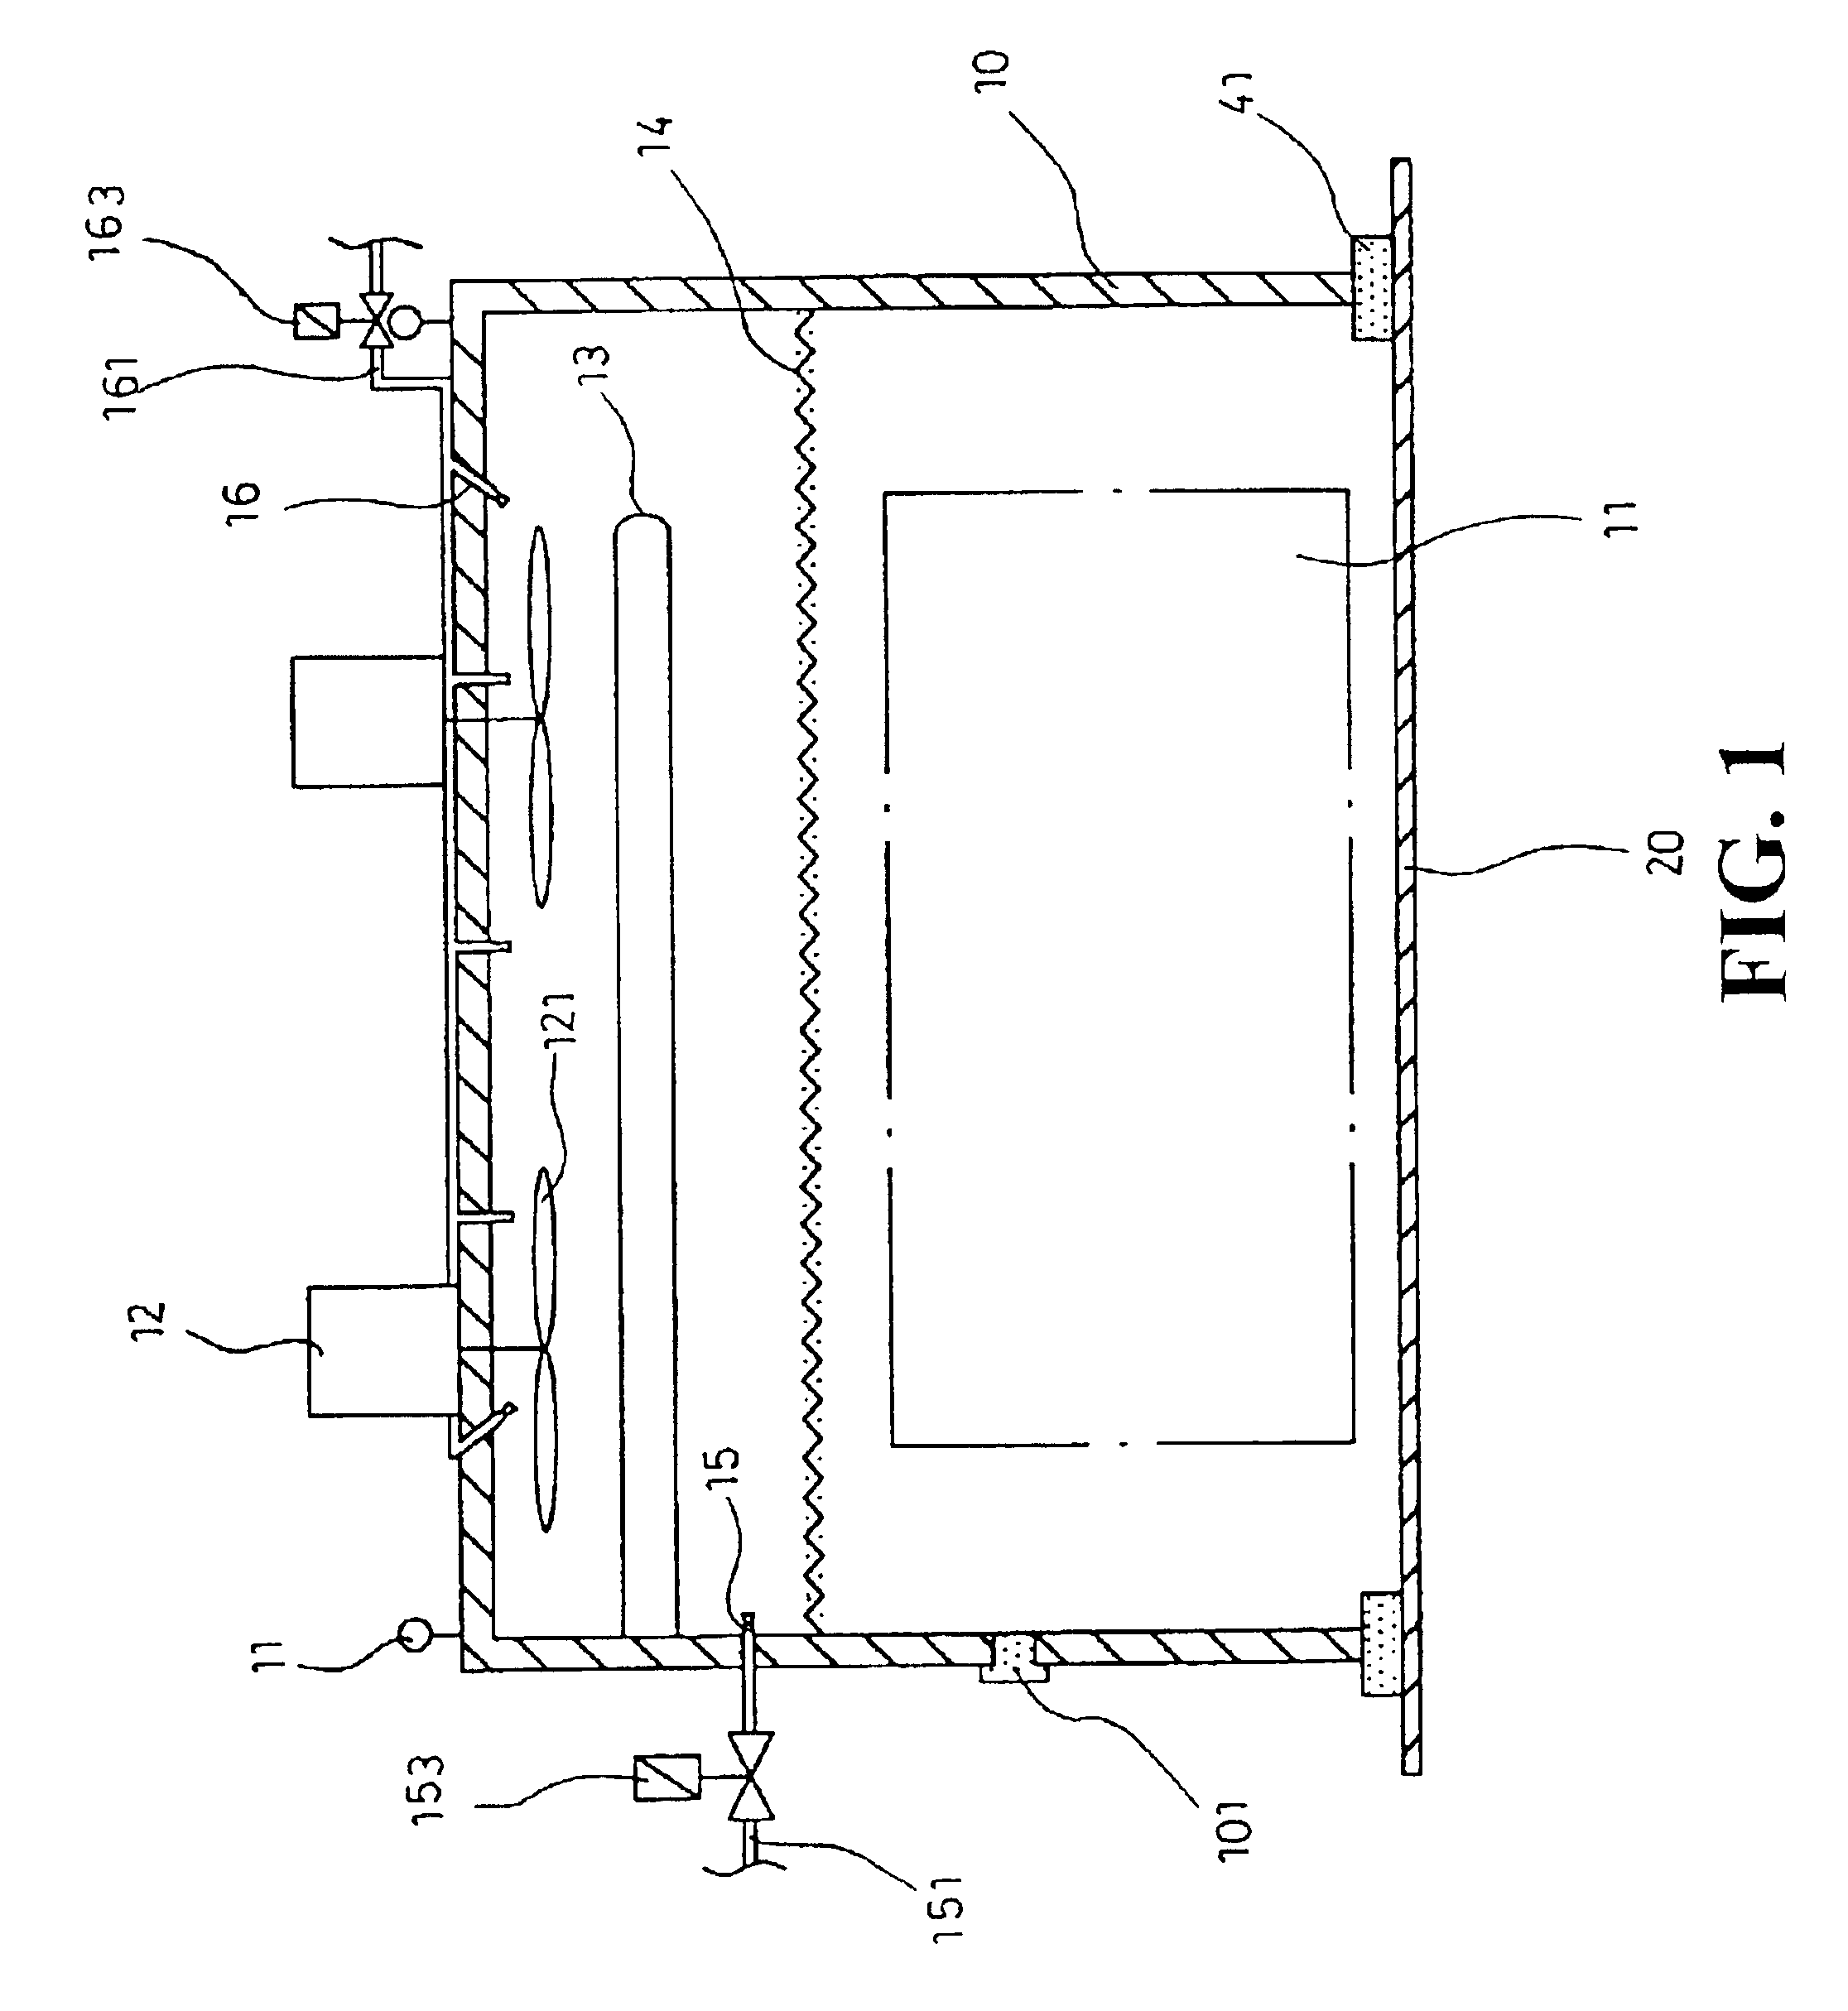 Flexible and mobile high transition rate of temperature test devices